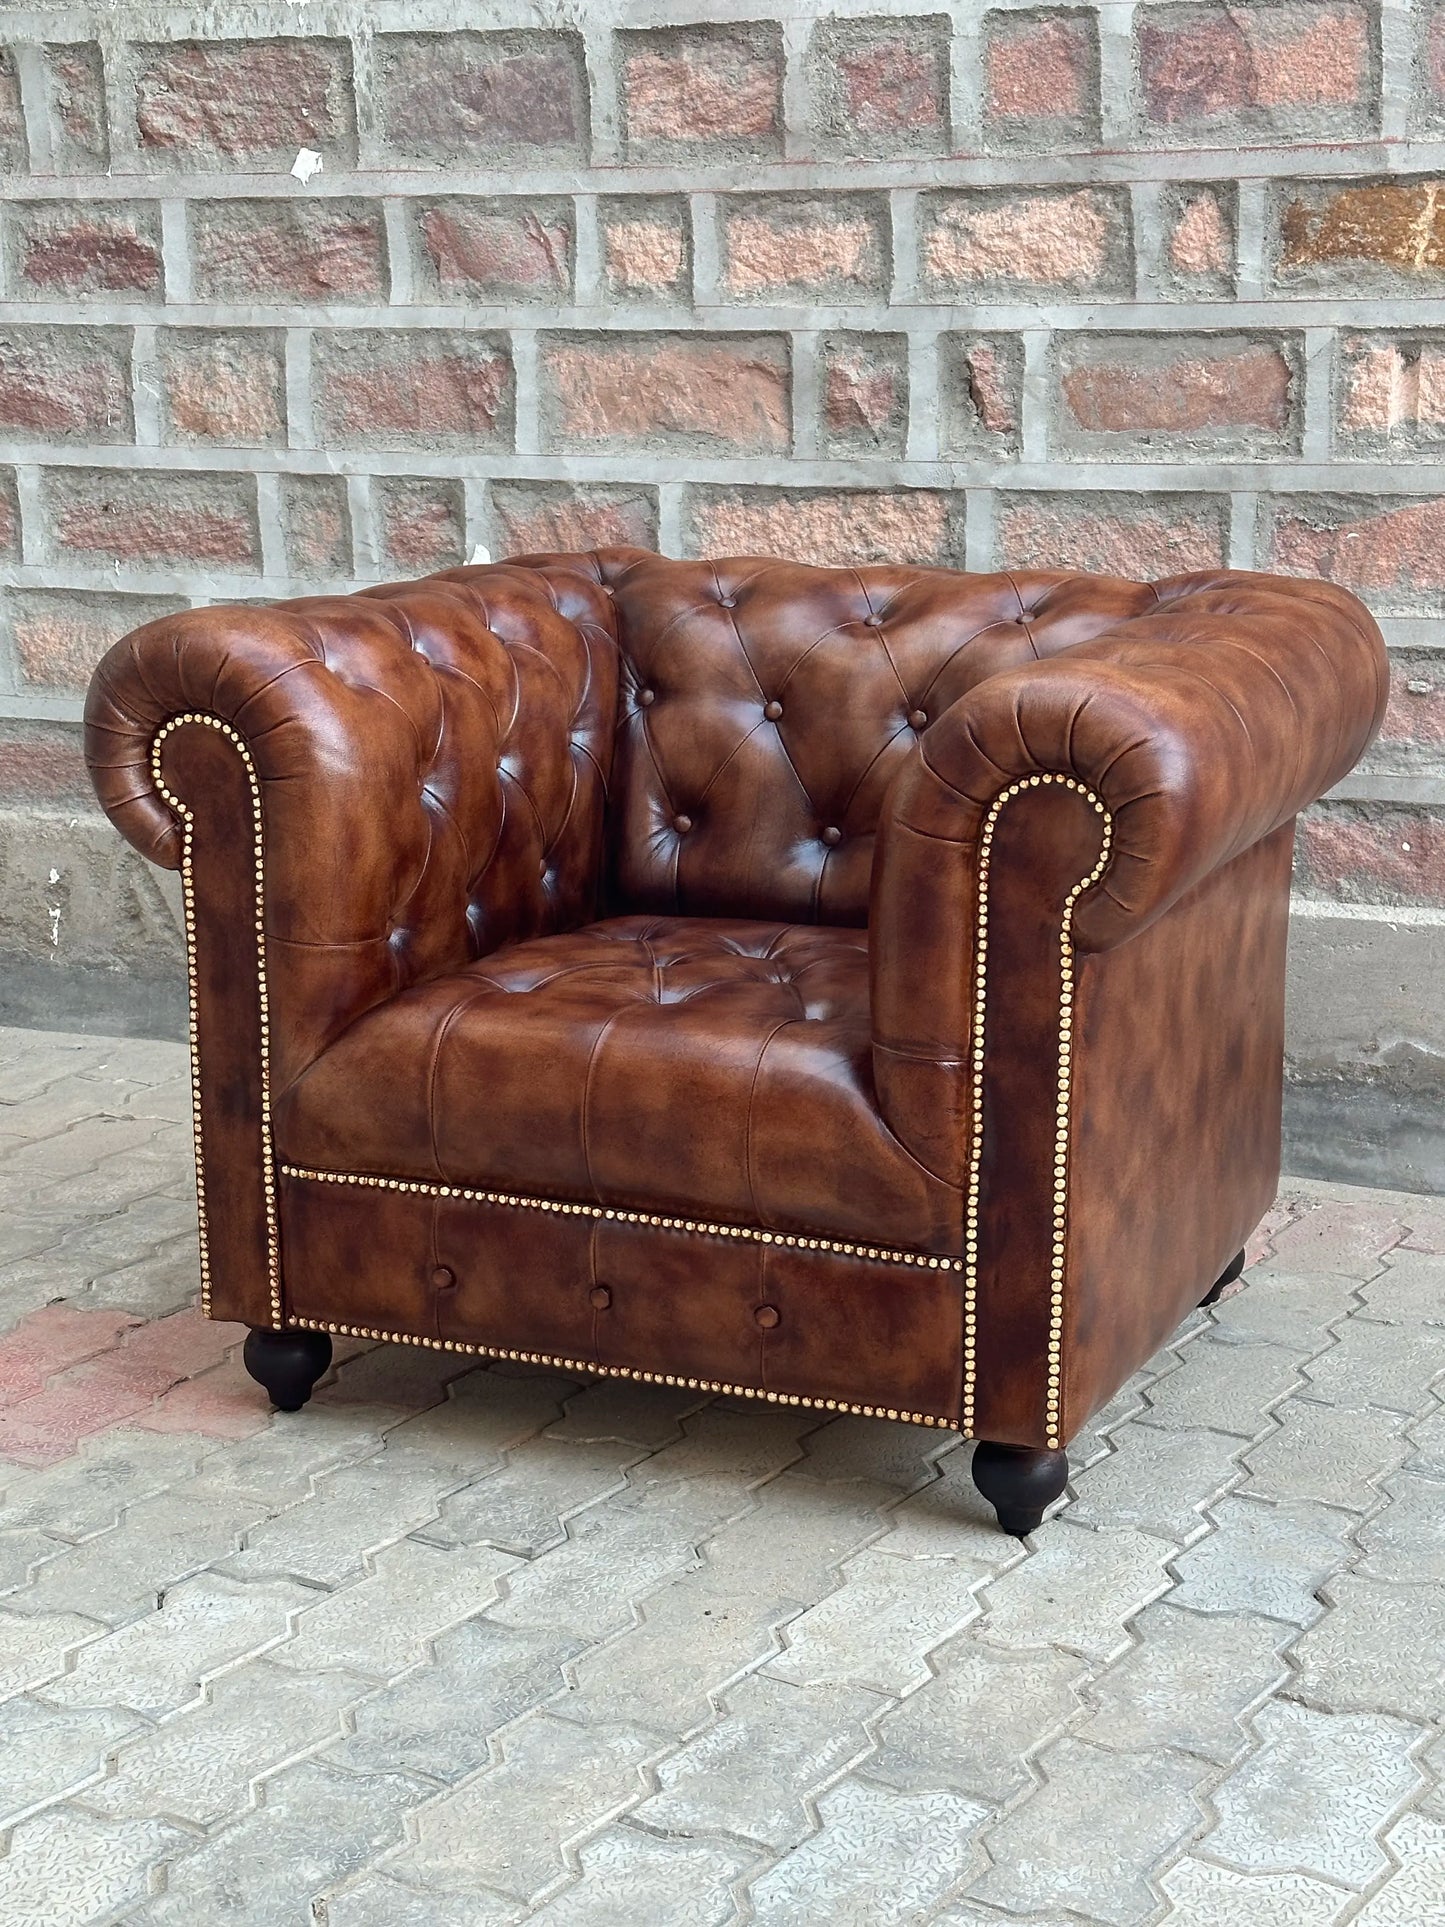 37" Armchair Tufted Bench | Winchester Chesterfield Leather Armchair with Tufted Bench Seat (WI-1T) by Rising Tide Design Co.